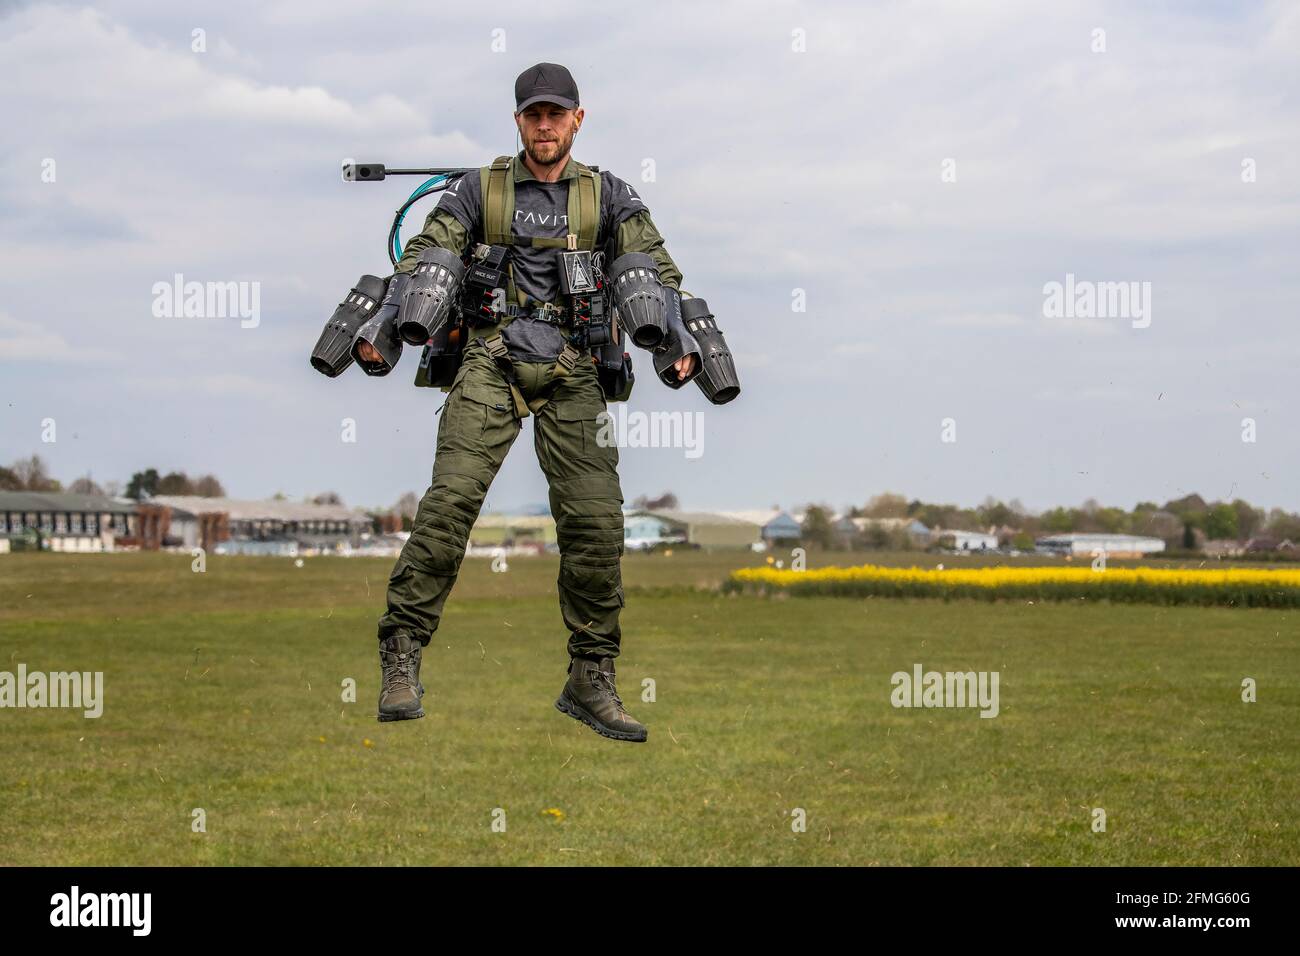 Richard Browning, founder of Gravity Industries, takes flight in his body-controlled jet-powered suit at Old Sarum Airfield, Salisbury, Wiltshire. Stock Photo